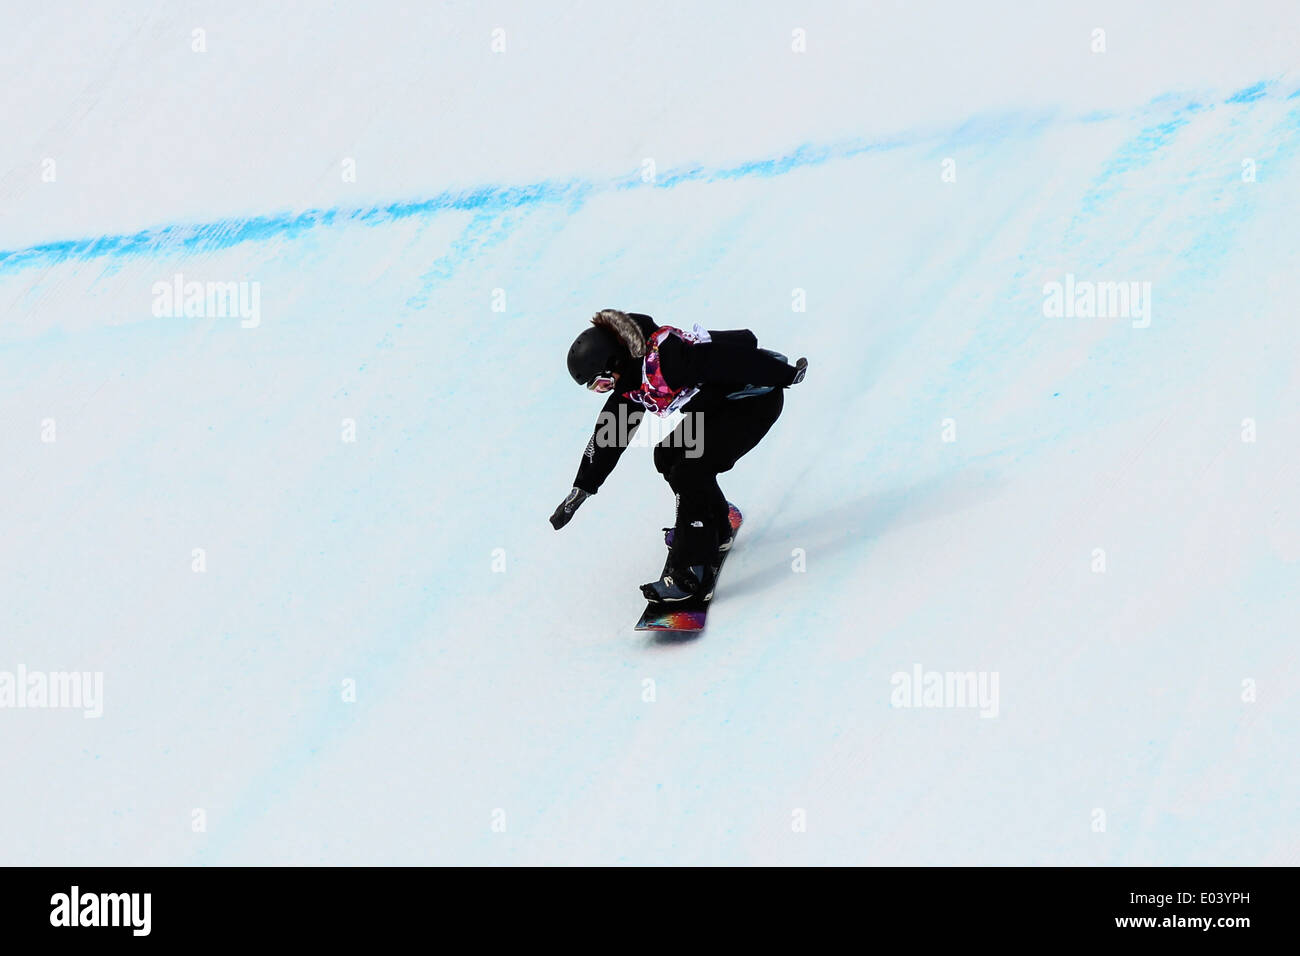 Shelly Gotlieb (NZL) competing in Women's Snowboard Slopestyle at the Olympic Winter Games, Sochi 2014 Stock Photo